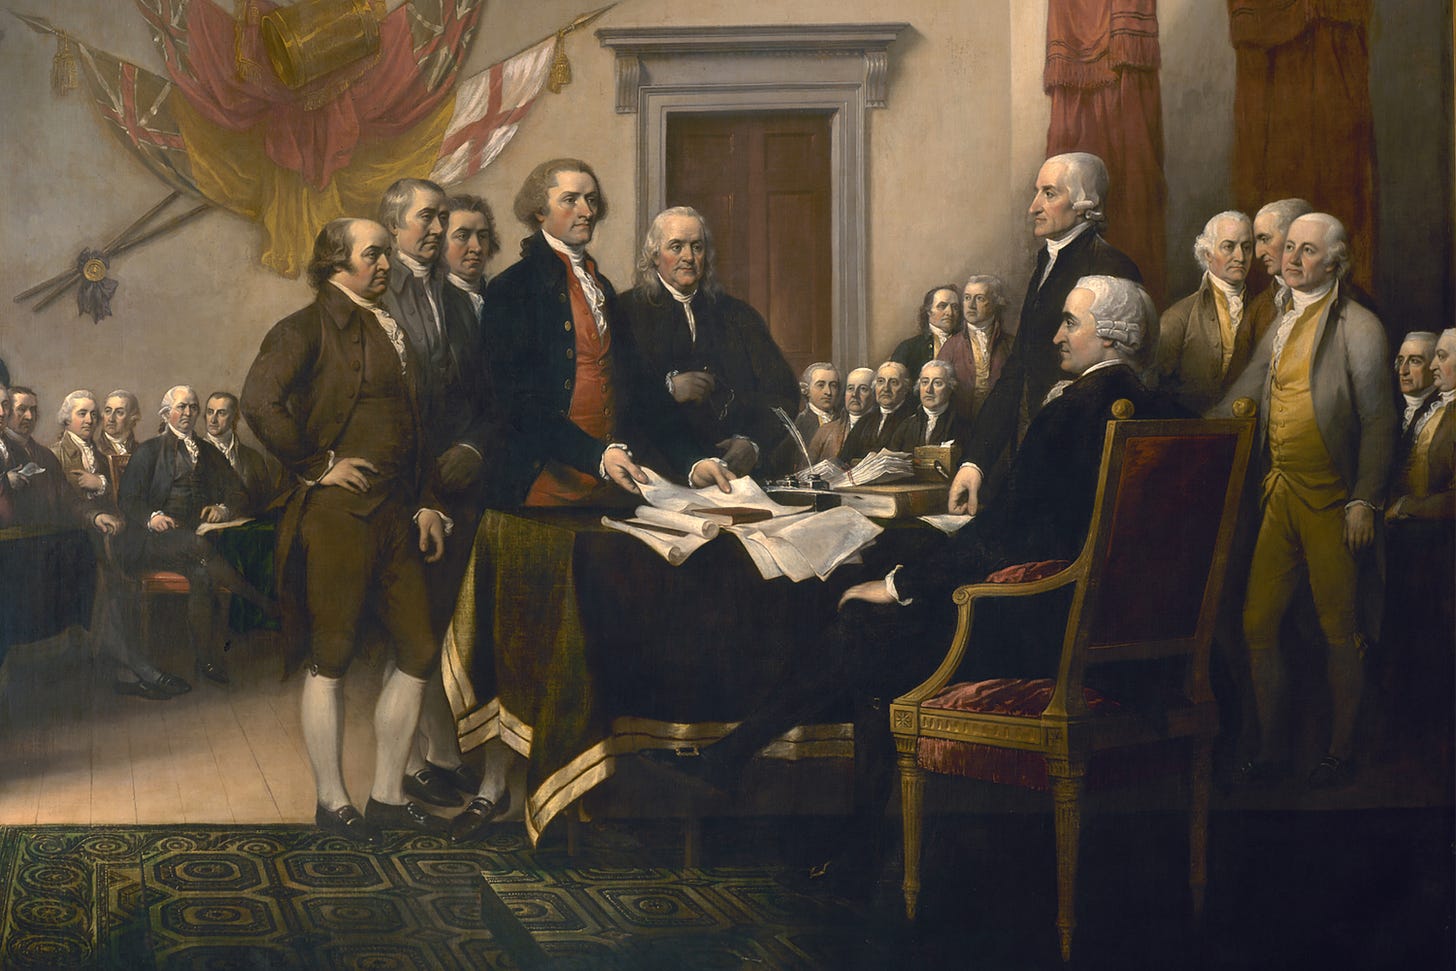 Rare copy of the Declaration of Independence found in England